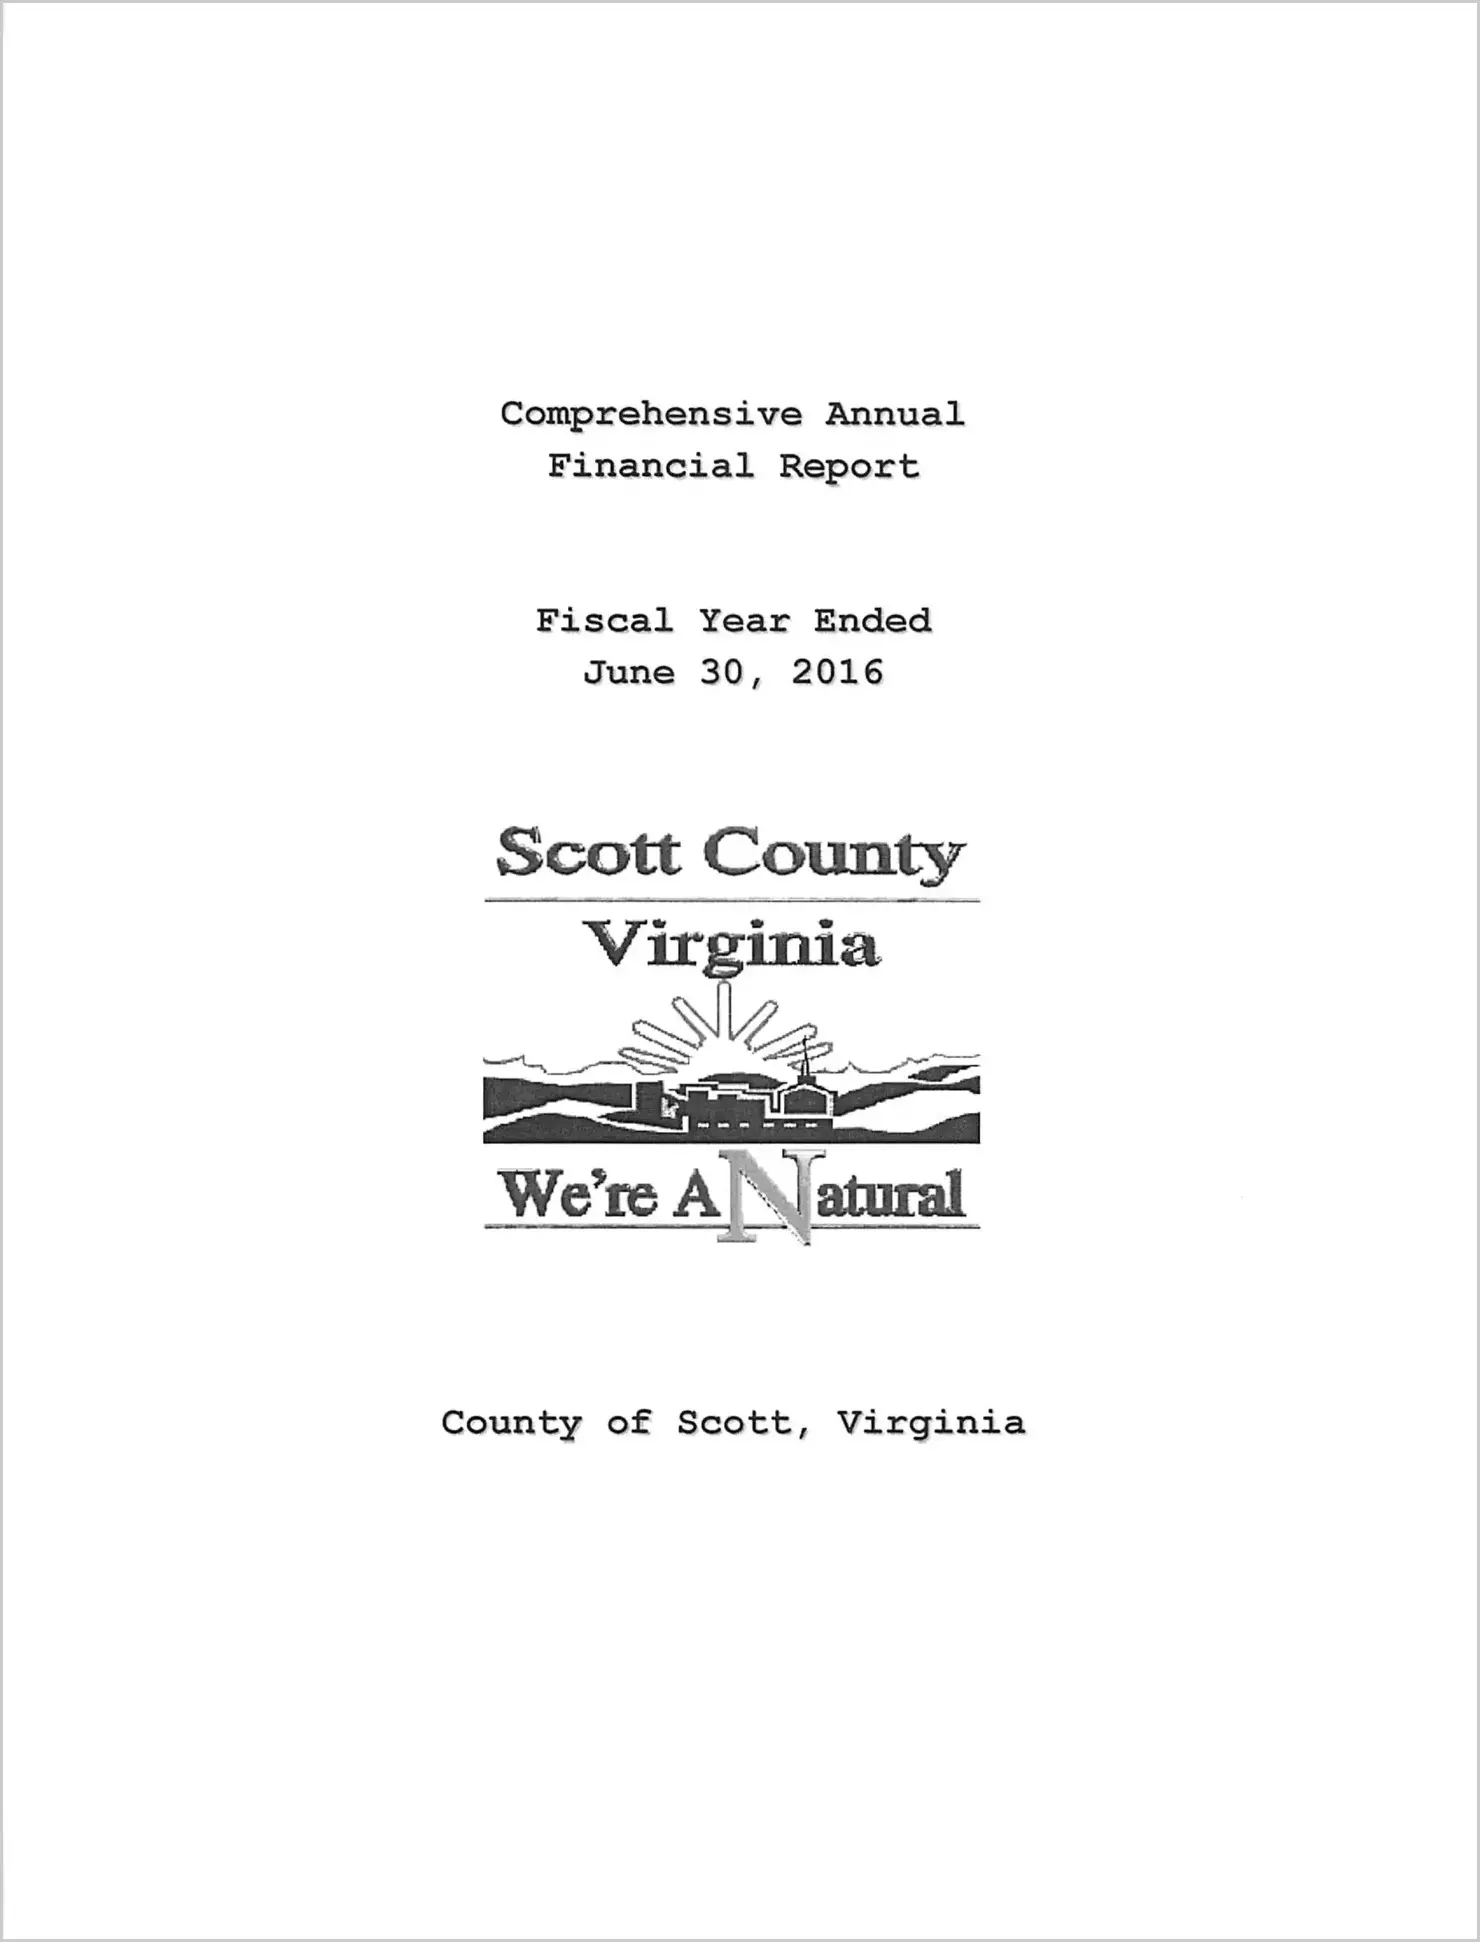 2016 Annual Financial Report for County of Scott